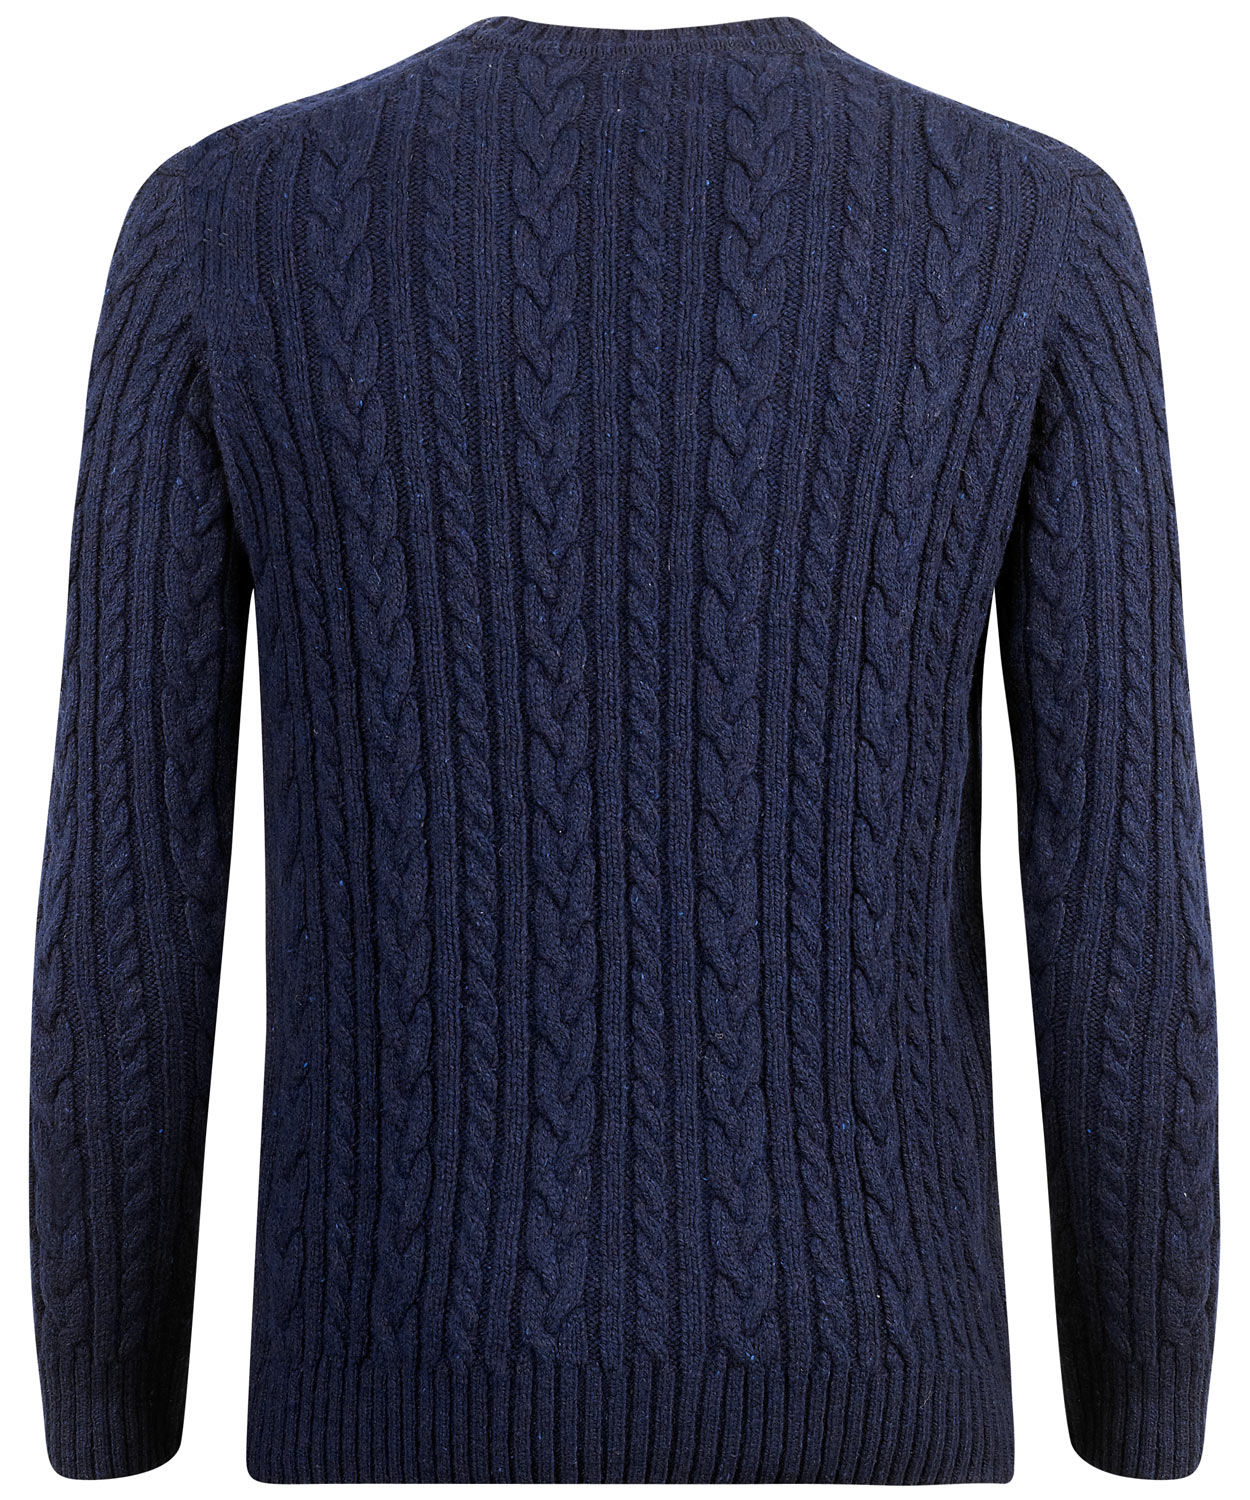 Lyst - Edwin Navy Cable Knit Crew Neck Jumper in Blue for Men